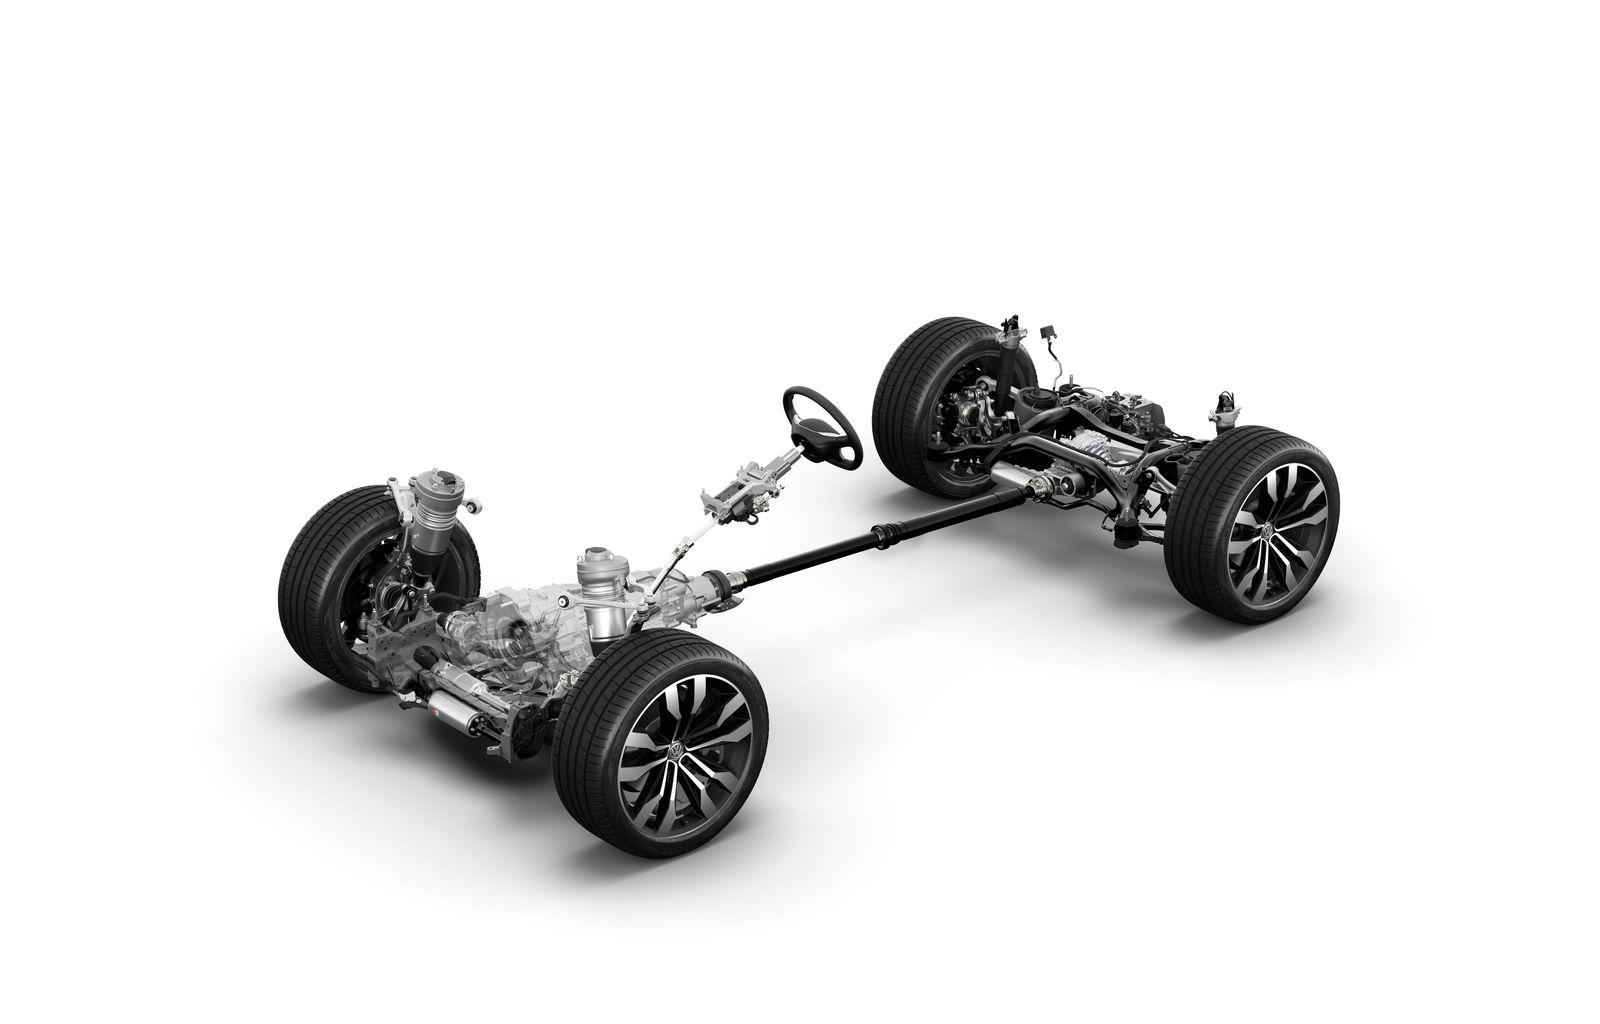 4MOTION all-wheel-drive system